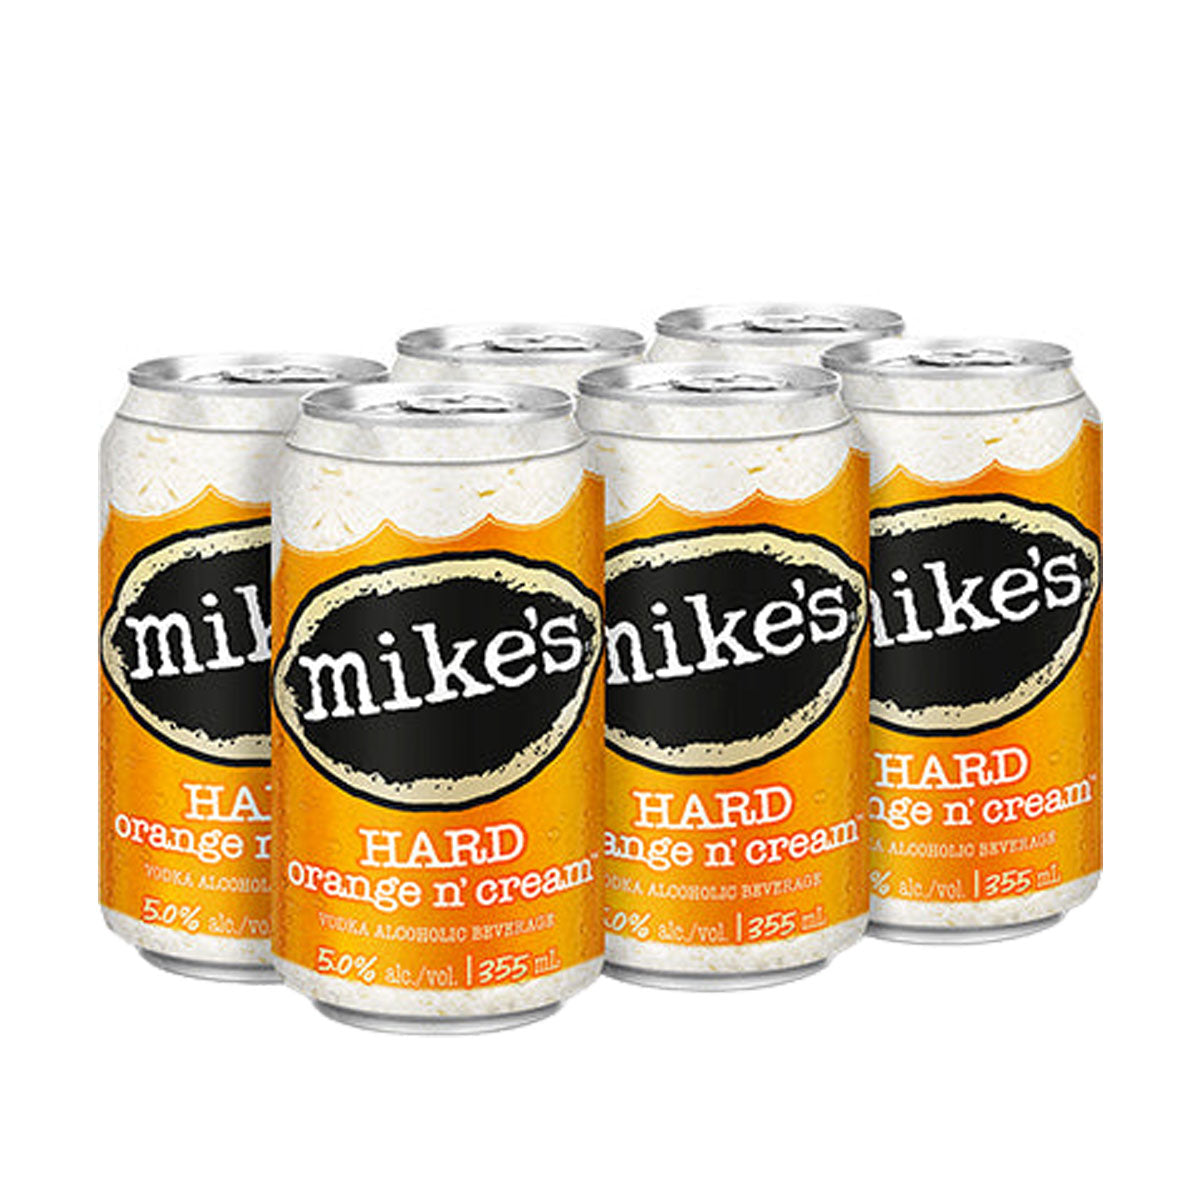 TAG Liquor Stores BC - Mike's Hard Orange n'Cream 6 Pack Cans